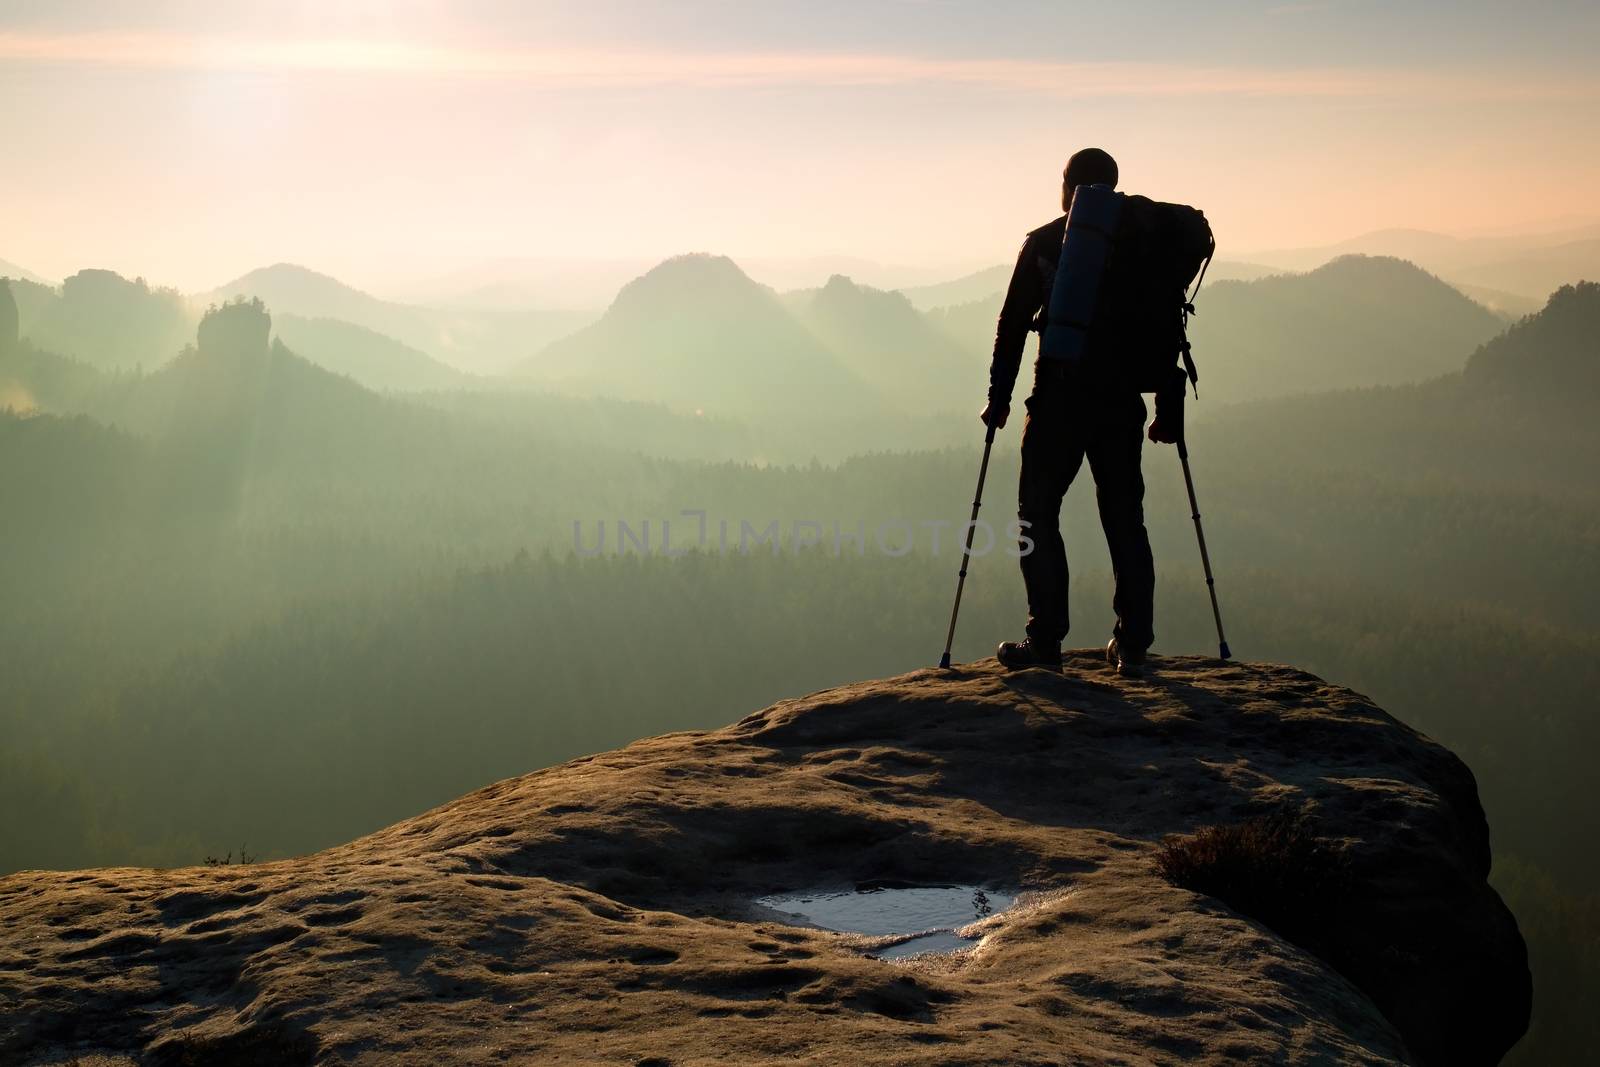 Tourist with leg in immobilizer. Hiker silhouette with medicine crutch on mountain by rdonar2